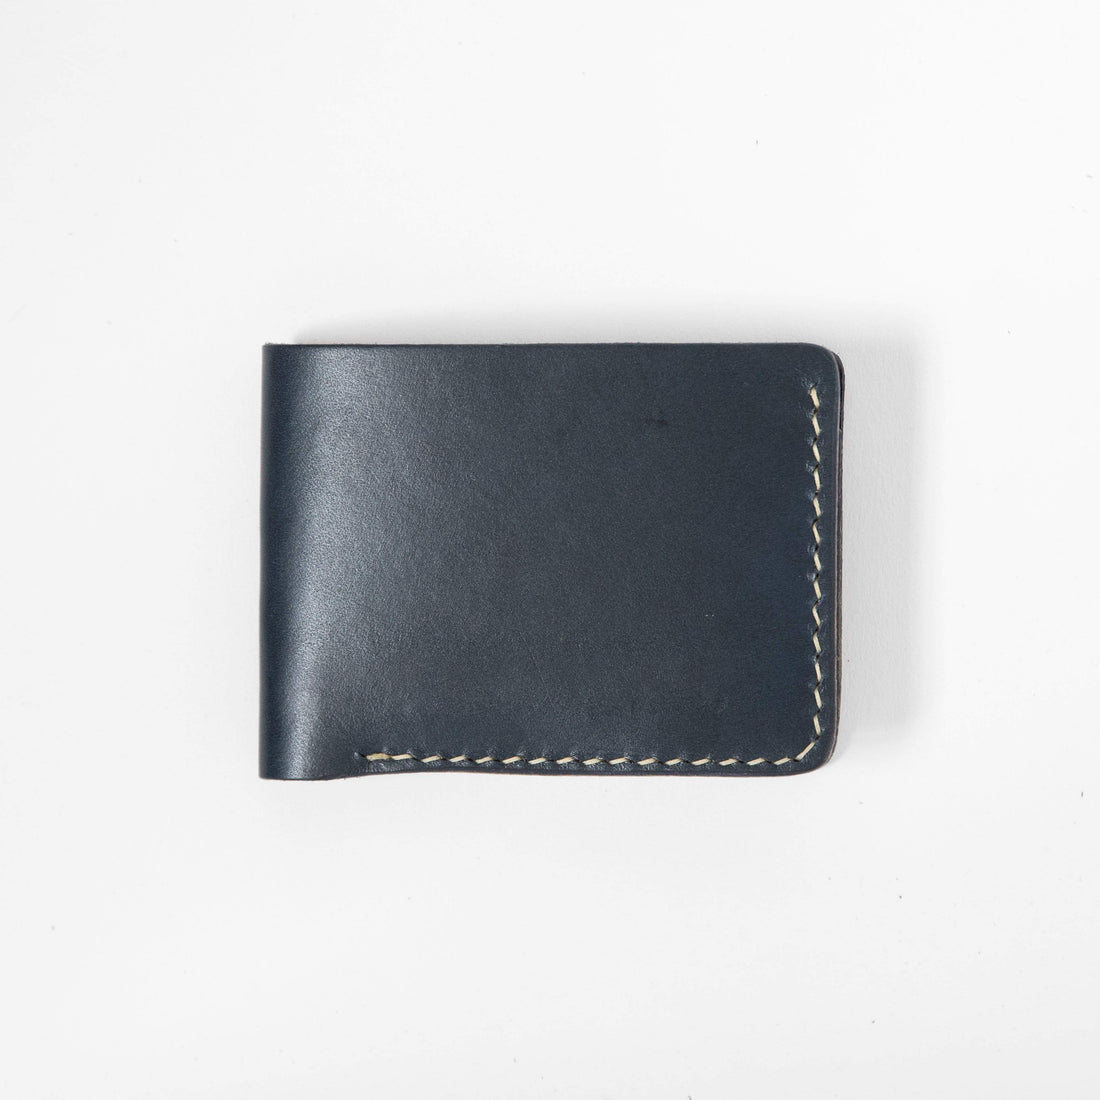 Black Slim Card Wallet | Leather Wallets Made in America at KMM & Co. No